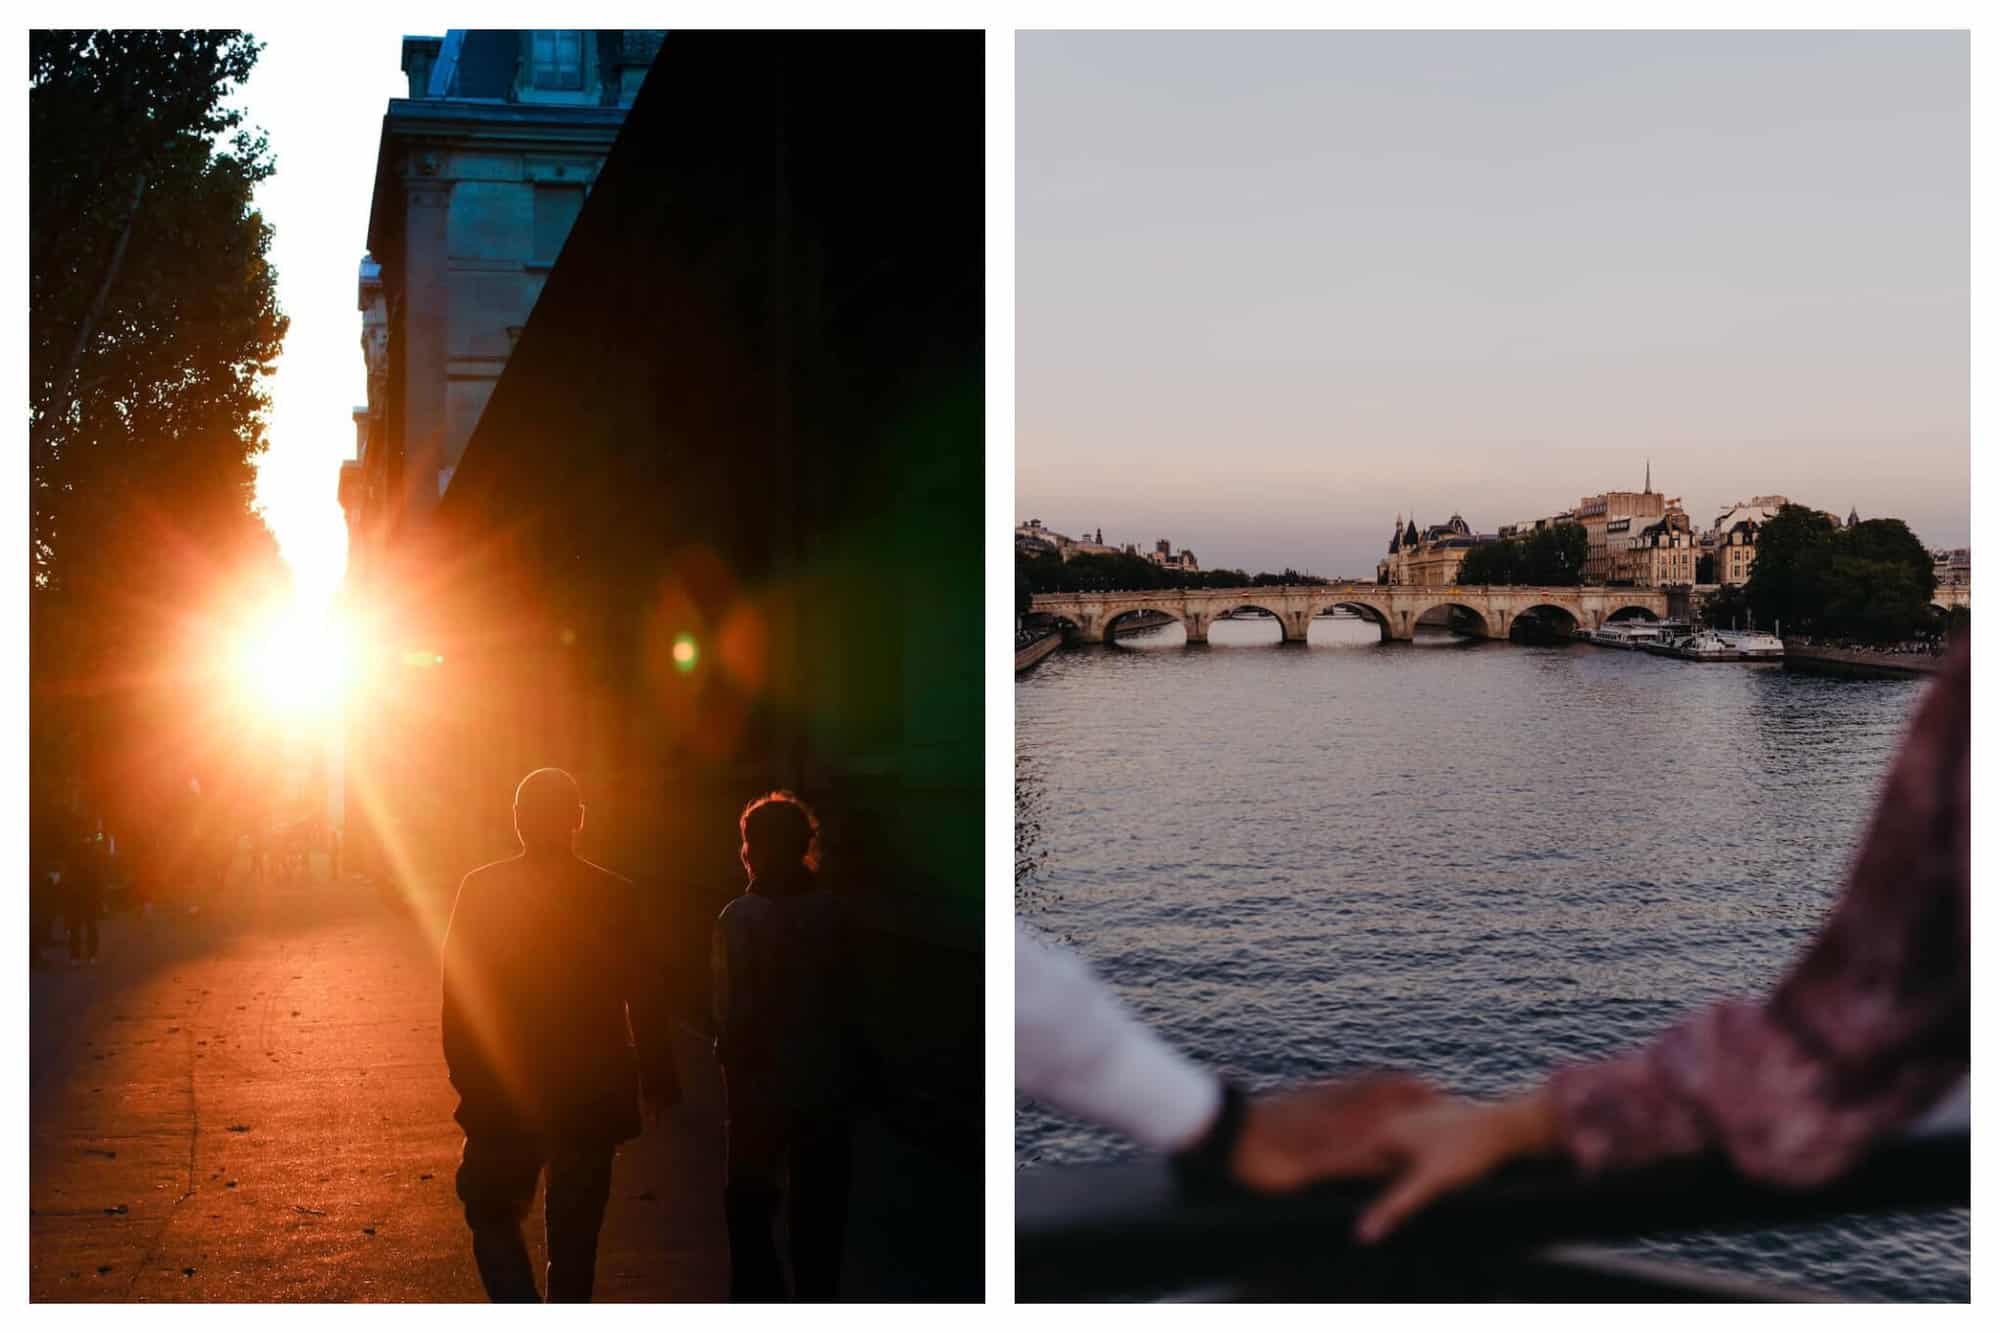 Right: A man and woman walk hand in hand towards the sunset on the streets of Paris. Left: A view of the Seine from one of the bridges. It is at sunset and one can see another bridge in the distance as well as some buildings. At the front of the photo is a man and woman's hand grasping one another, slightly out of focus.